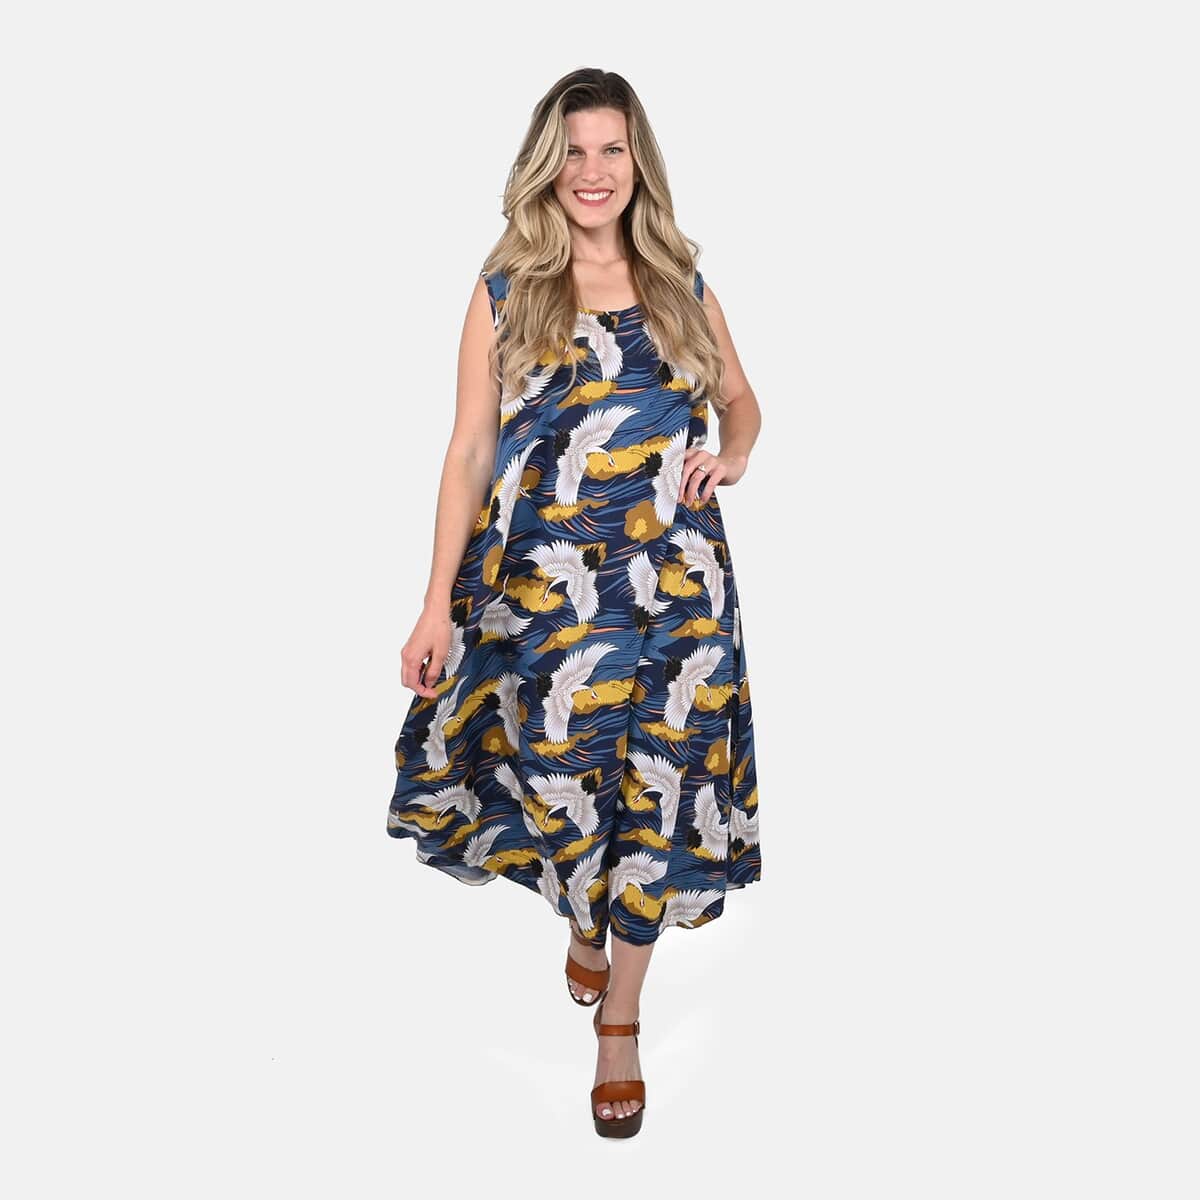 TAMSY Blue Bird A-Line Midi Dress - One Size Fits Most (48.8"x49.2") image number 0